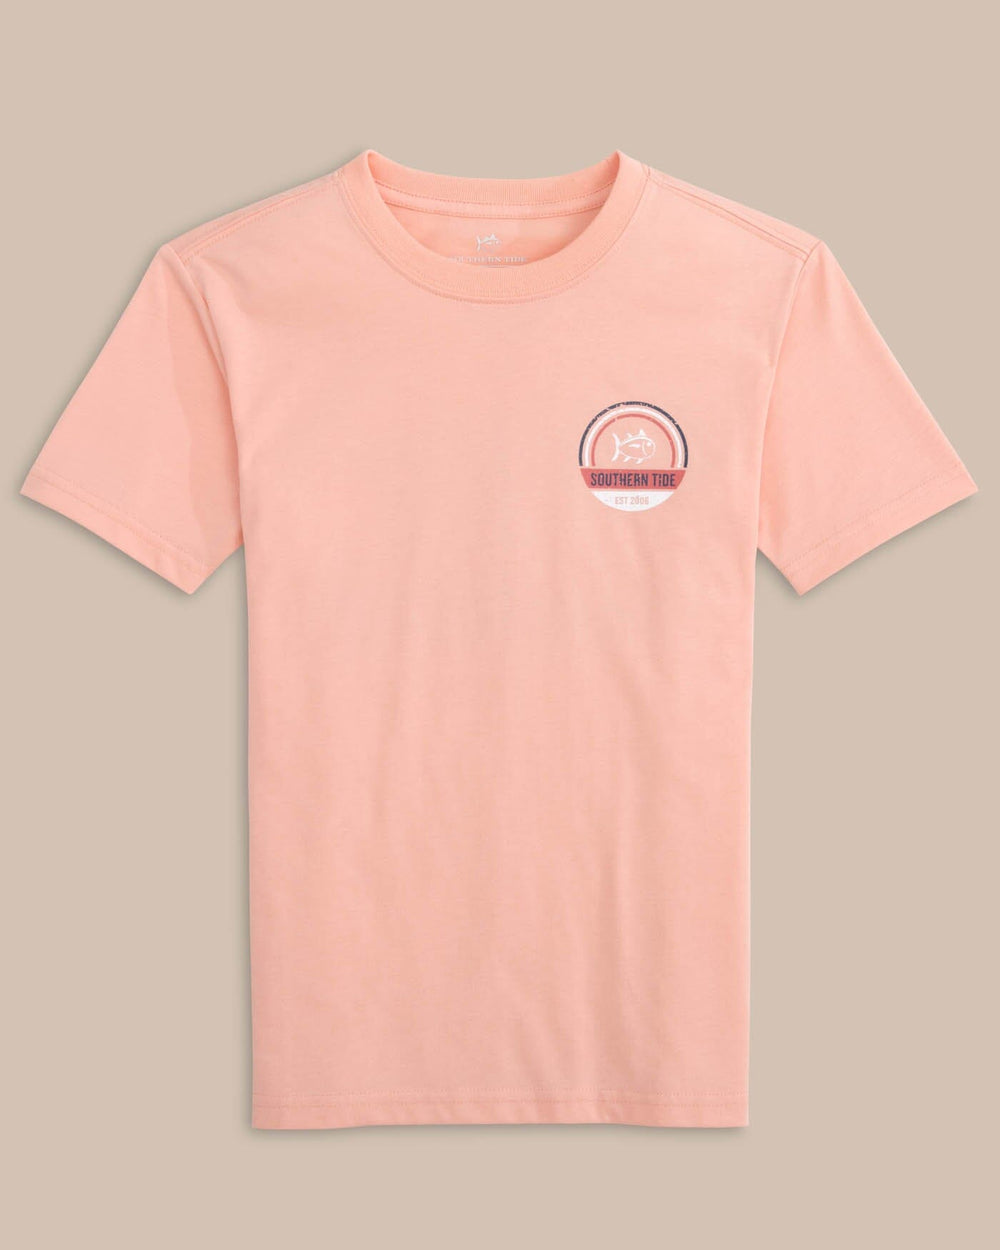 The front view of the Southern Tide Kids Shack Circle Short Sleeve T-shirt by Southern Tide - Apricot Blush Coral